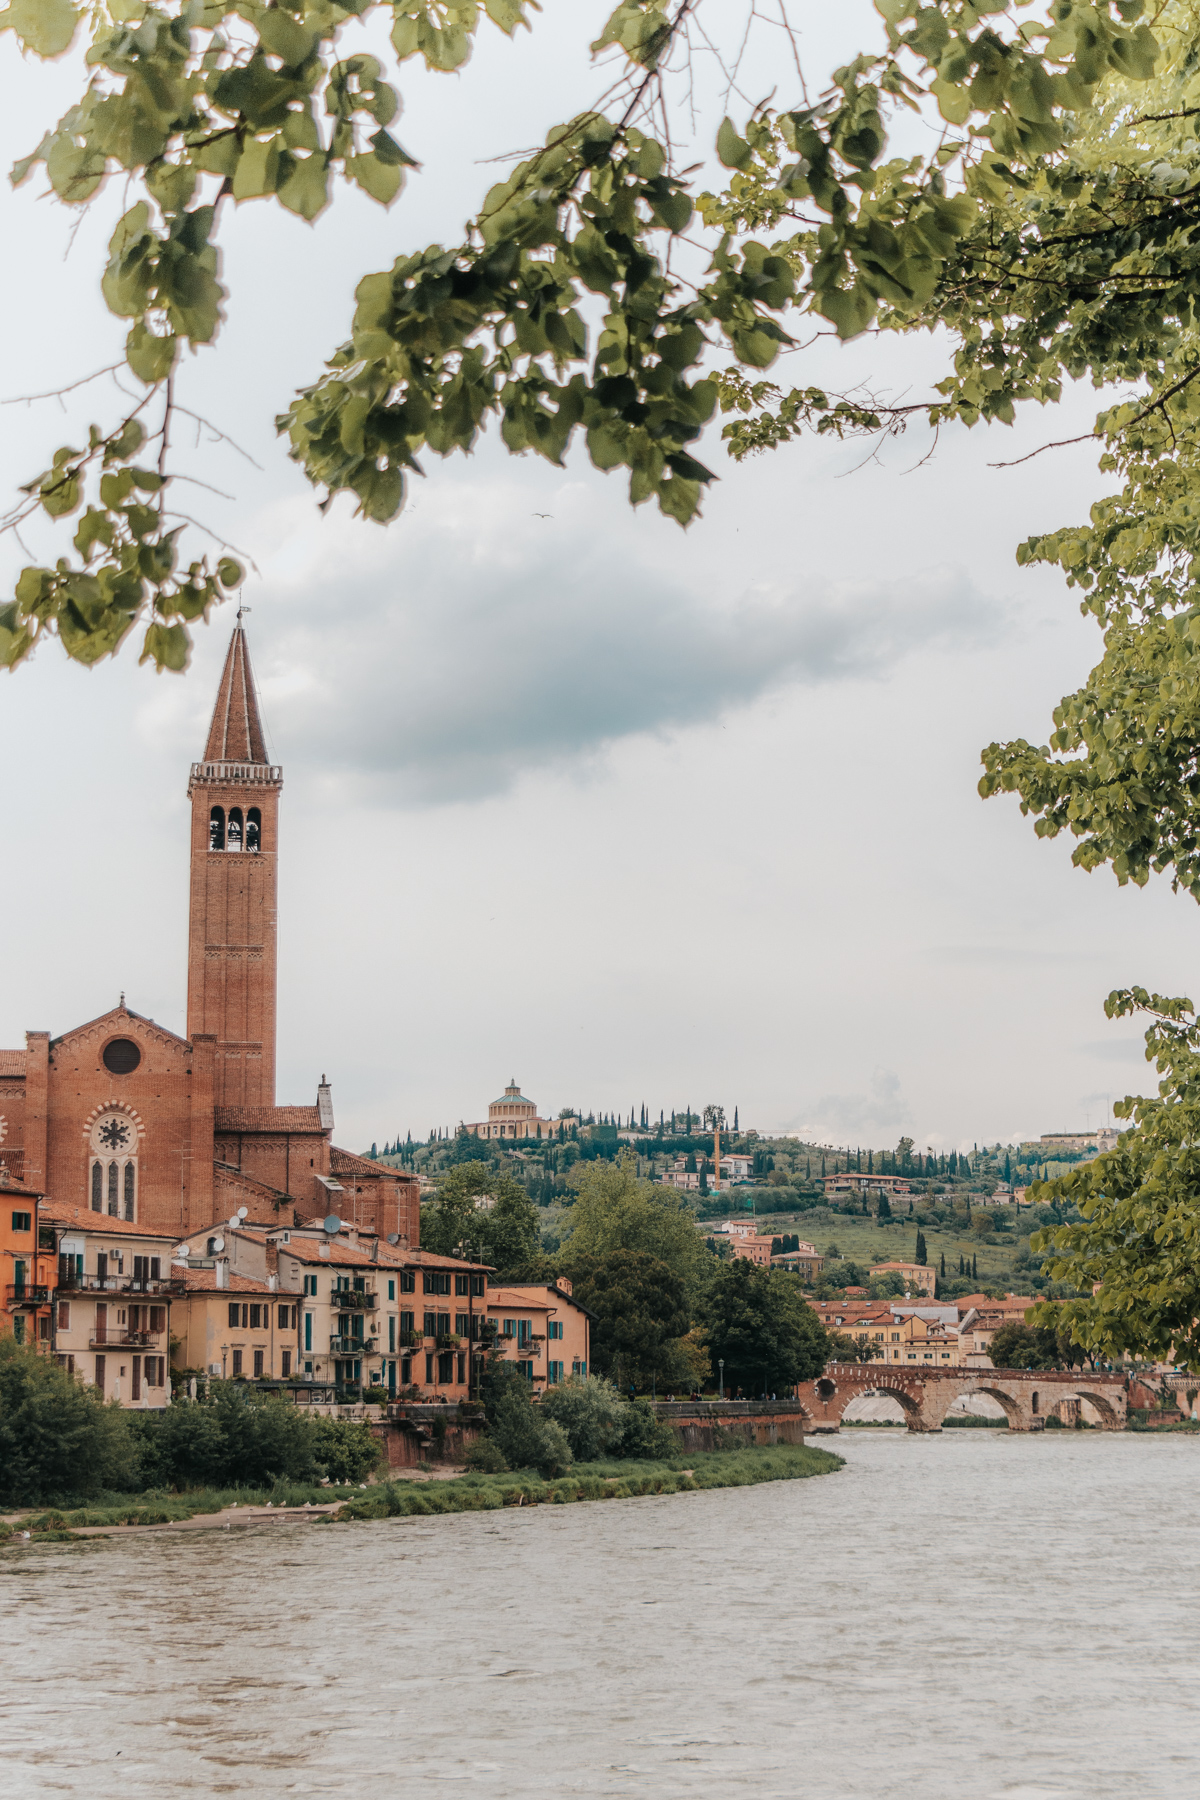 The 15 Best & Unique Things To Do In Verona, Italy You’ll Regret Missing